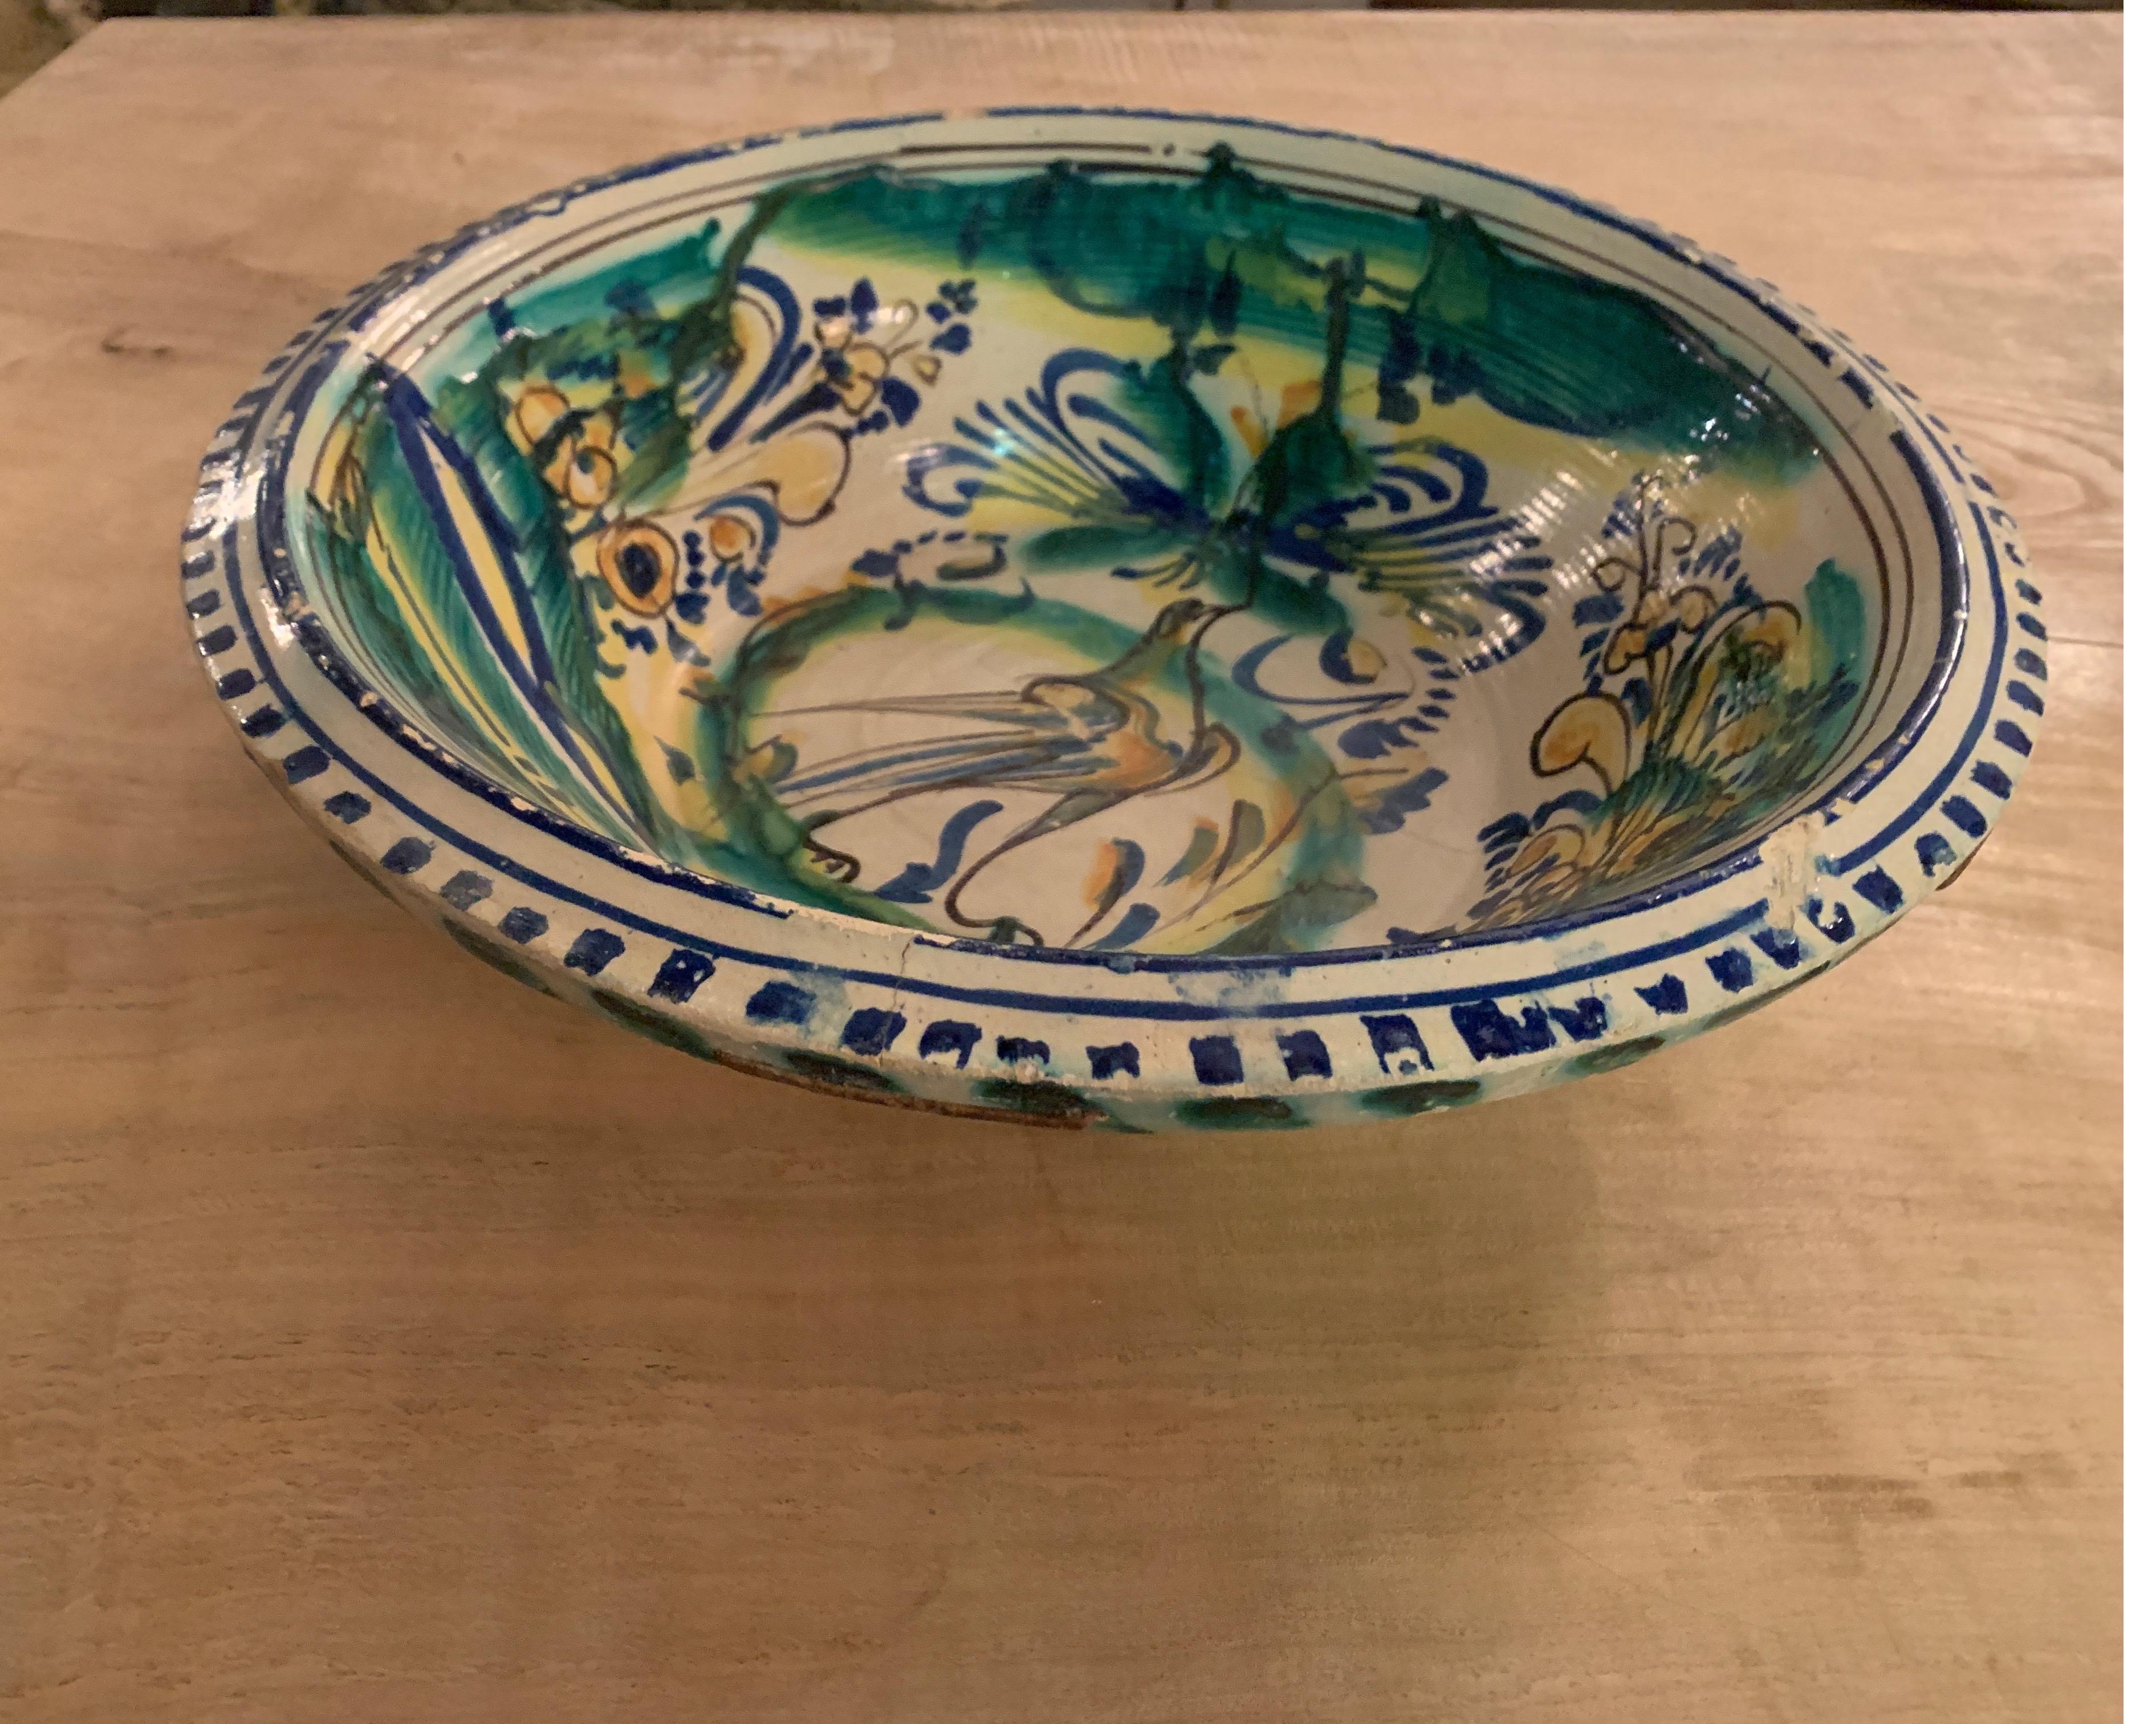 This is a wonderful design of bird in bright colors of yellow, greens and blues on decorative bowl from the Andalusia region of Spain. It has great character with the staple repairs as well.